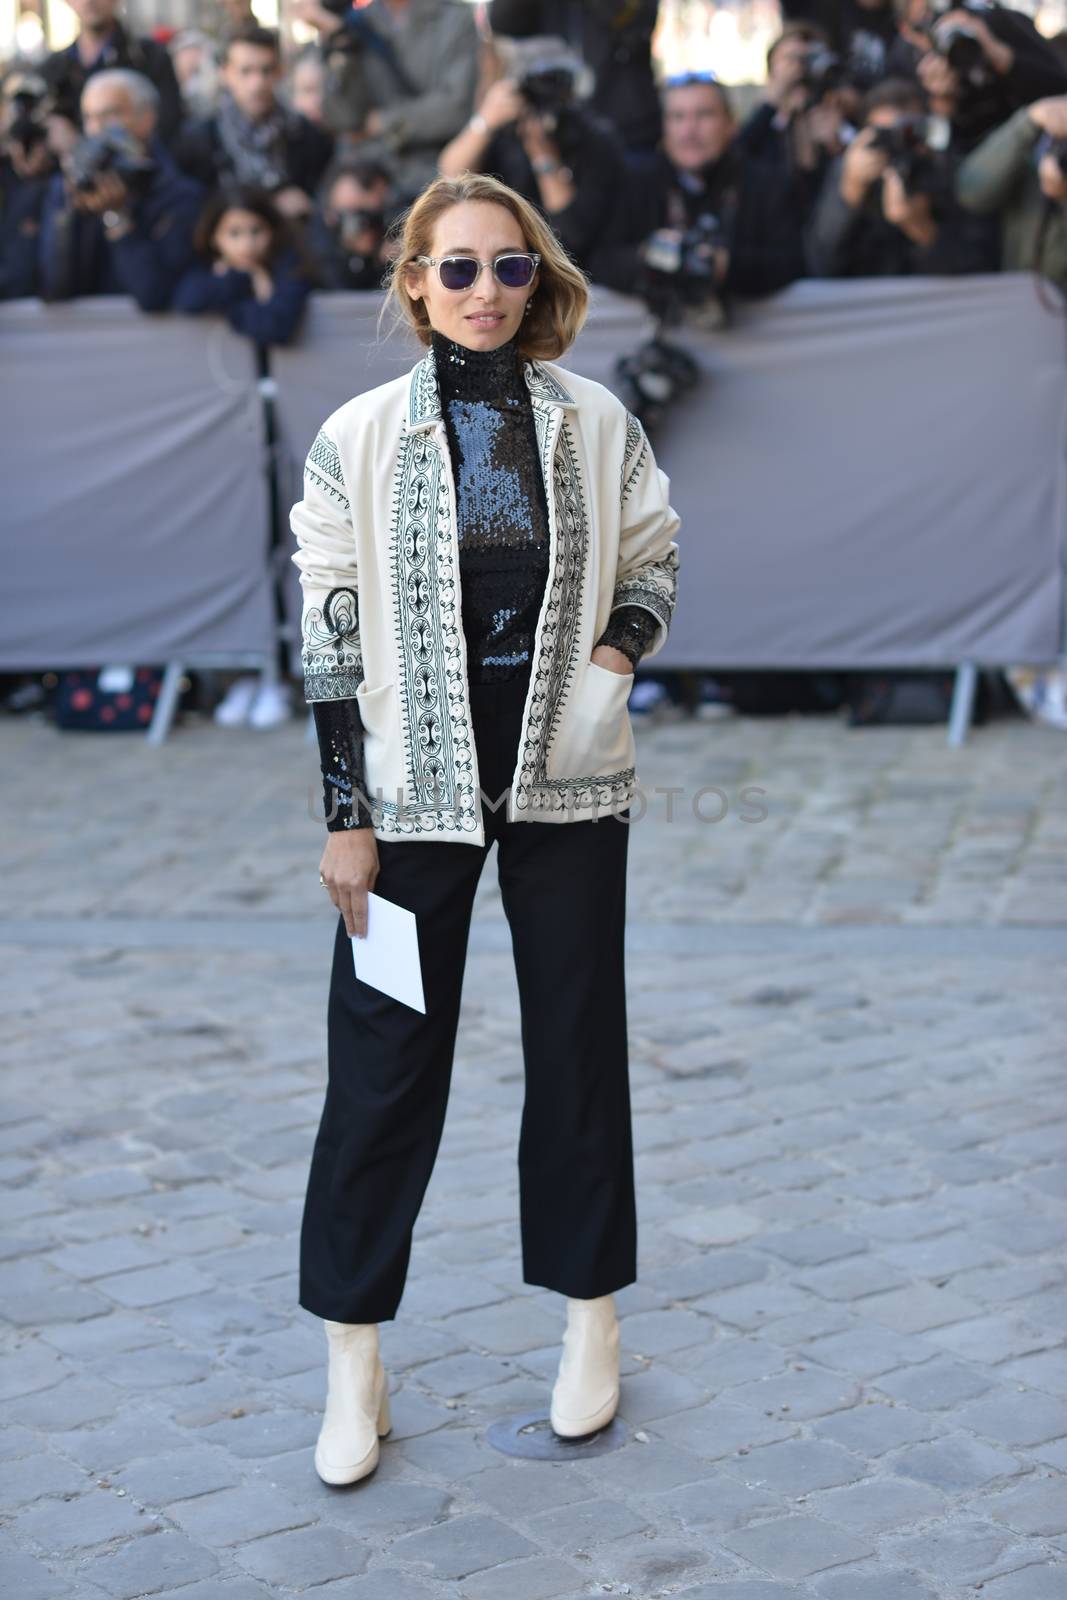 FRANCE, Paris: Alexandra Golovanoff is pictured as she arrives at Dior Fashion Show in Paris on October 2, 2015.